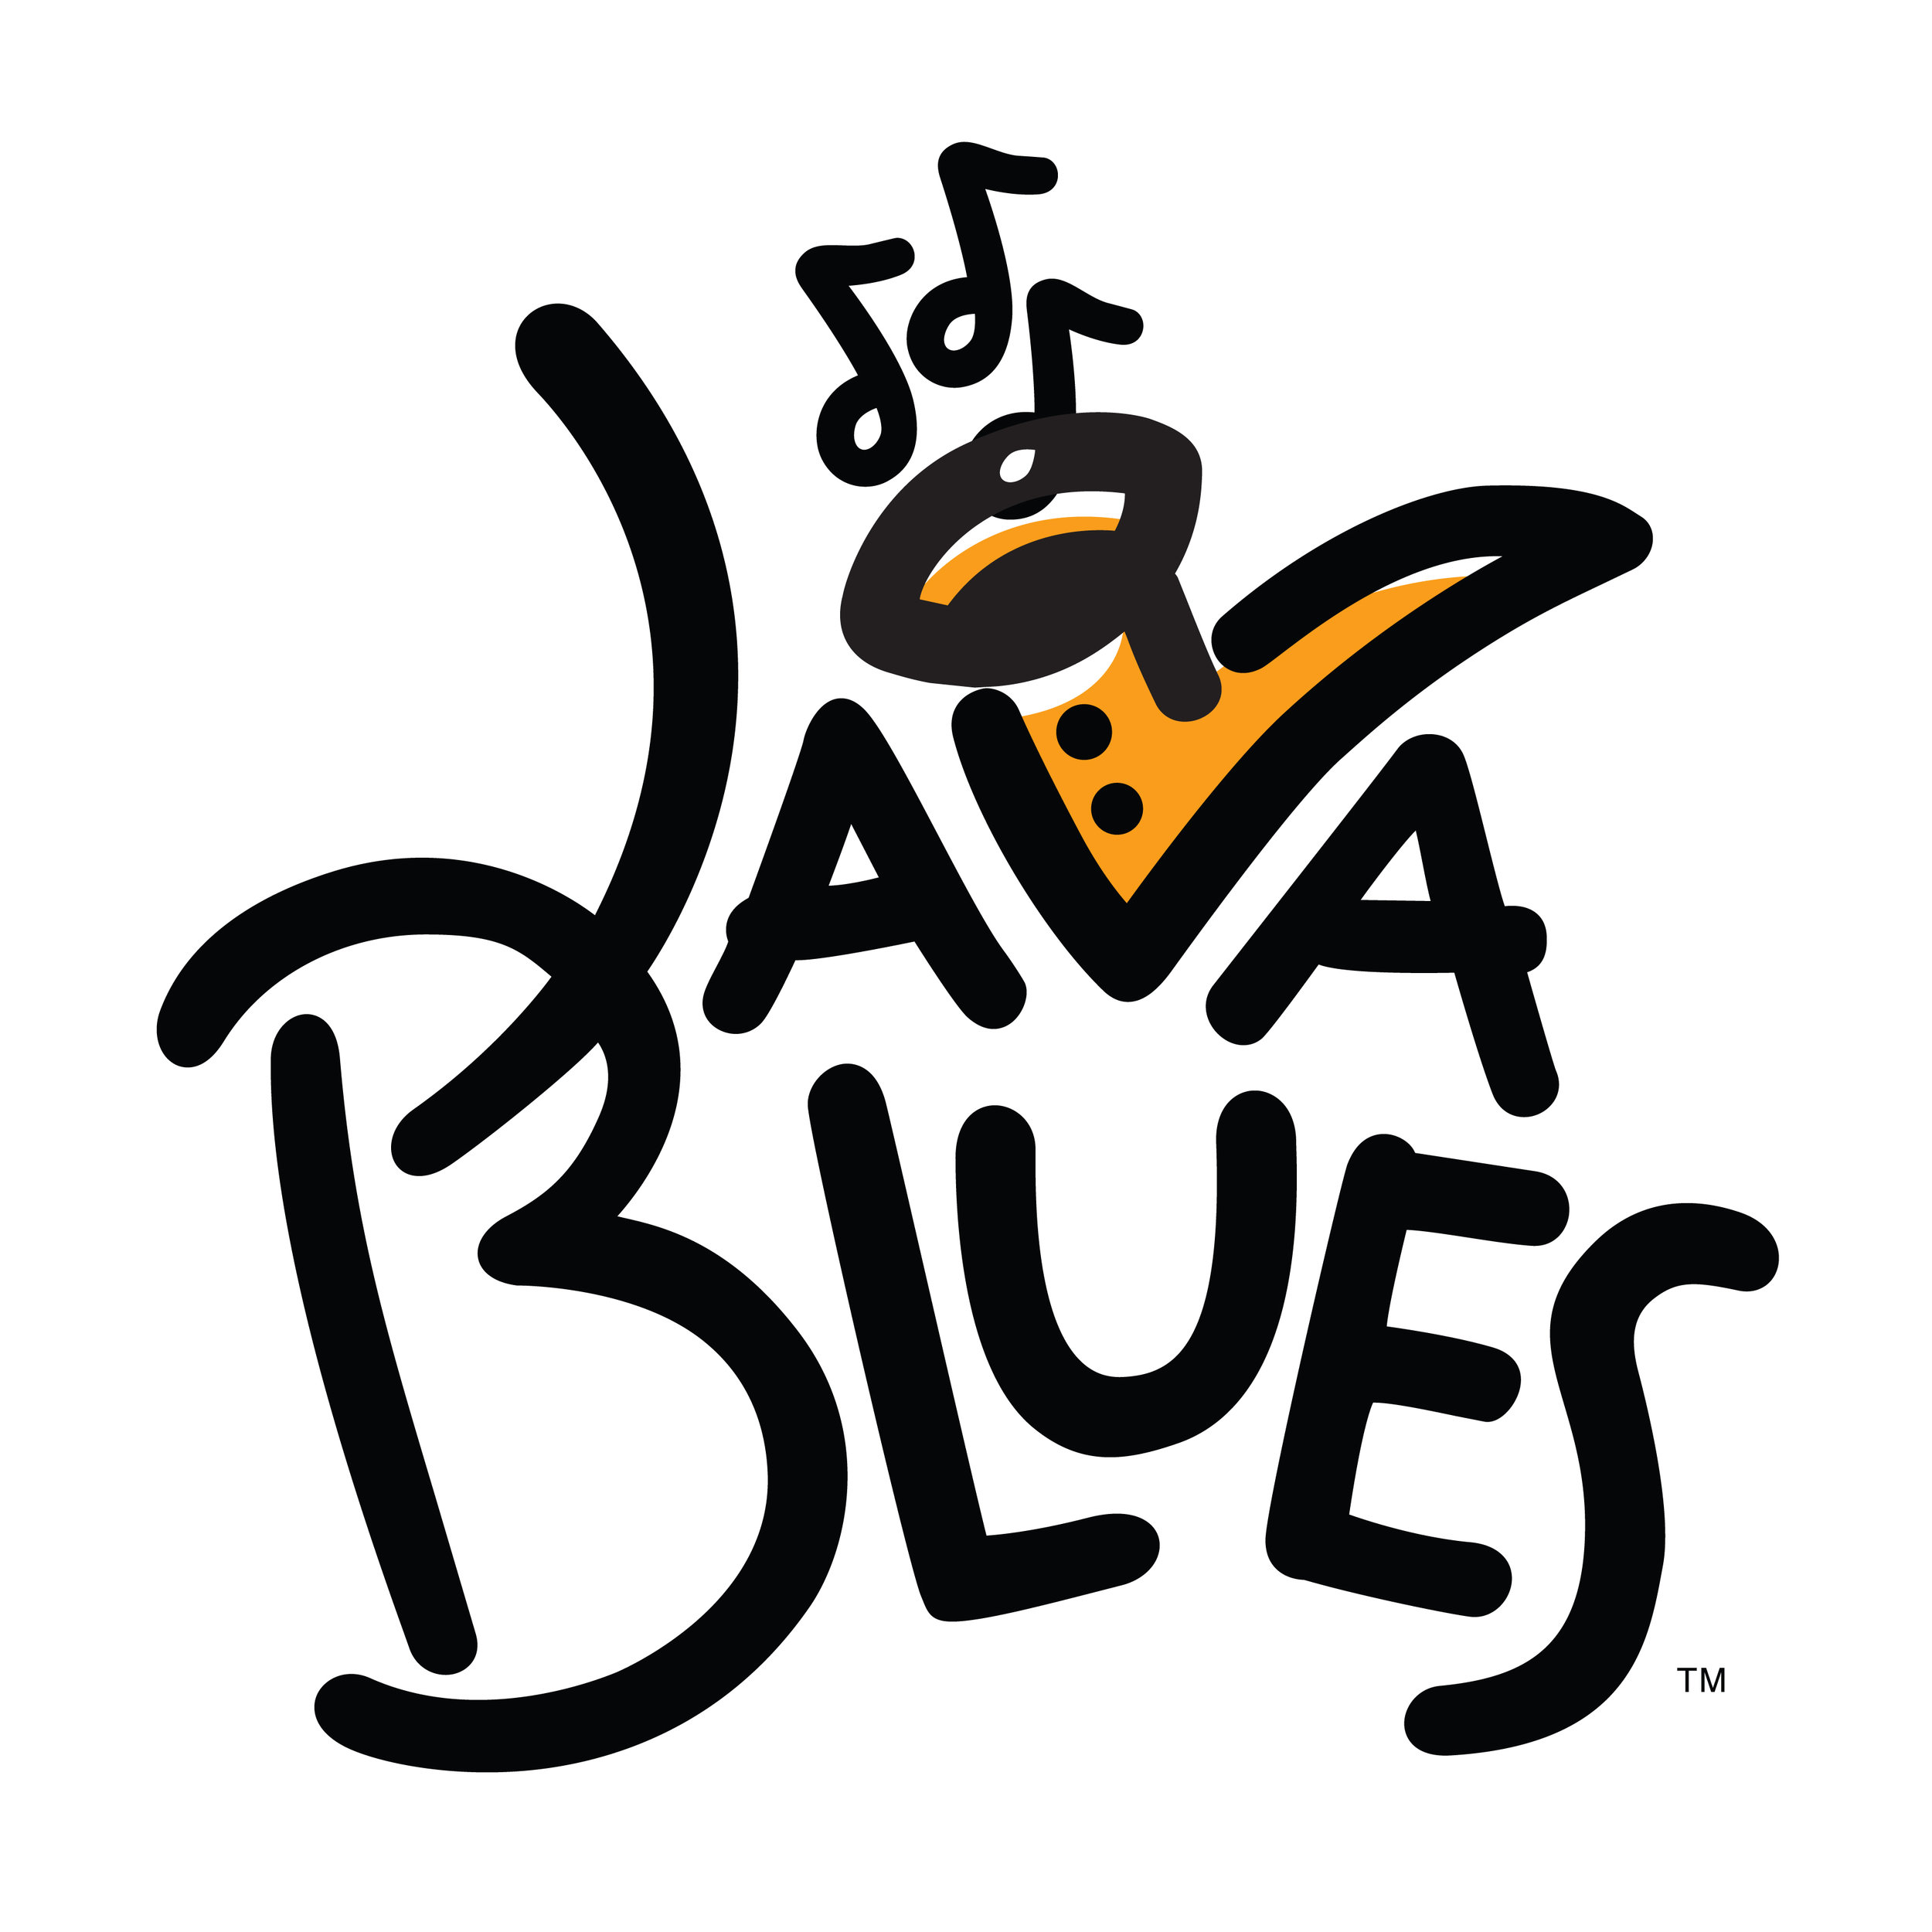  Java Blues logo  Branding creative and design by Chuck Mitchell 